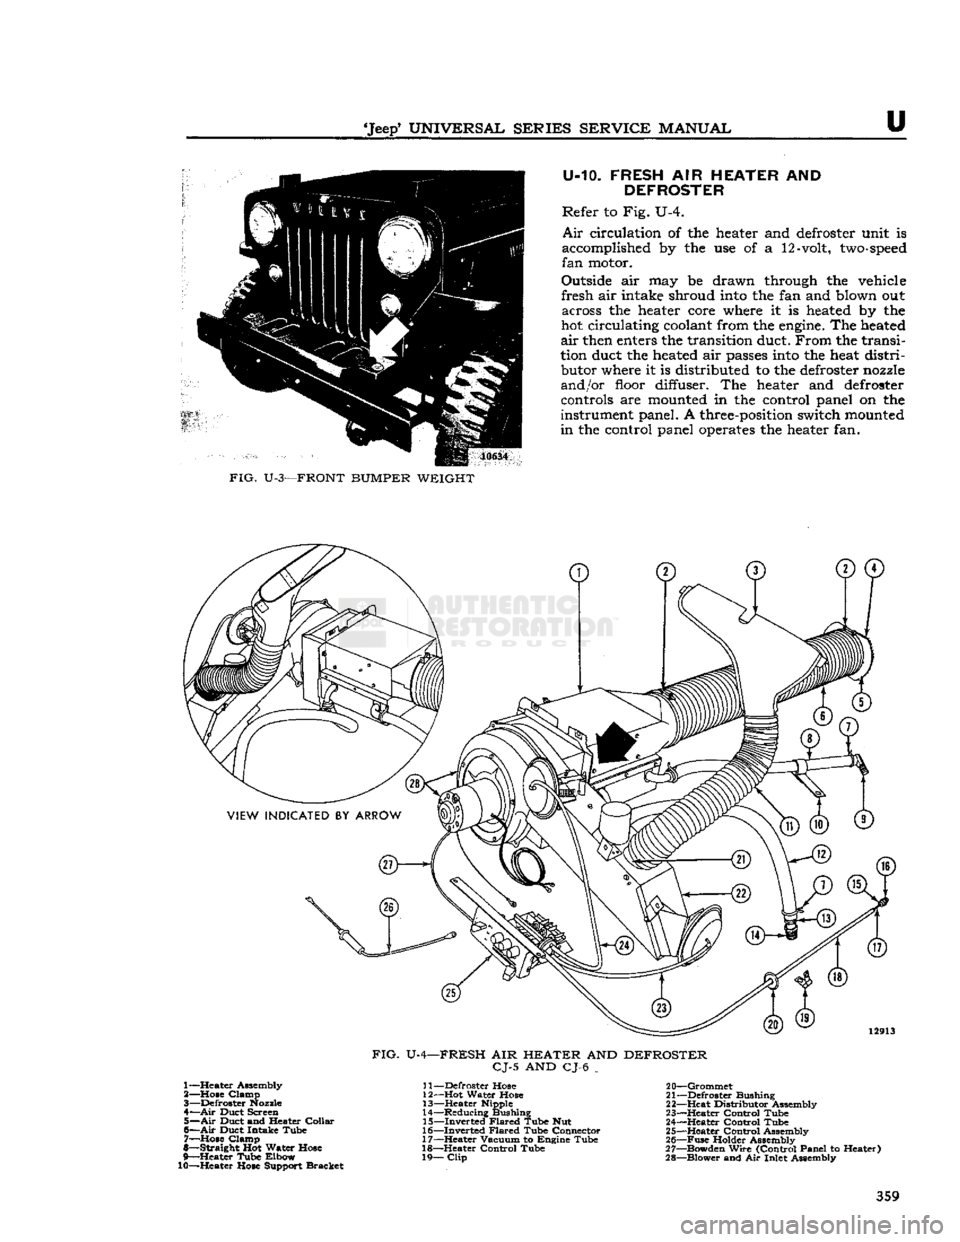 JEEP CJ 1953  Service Manual 
Jeep*
 UNIVERSAL
 SERIES
 SERVICE
 MANUAL 

U 
U-10. FRESH AIR HEATER AND 

DEFROSTER 

Refer to Fig. U-4. 

Air
 circulation of the
 heater
 and
 defroster
 unit
 is 

accomplished
 by the use of a